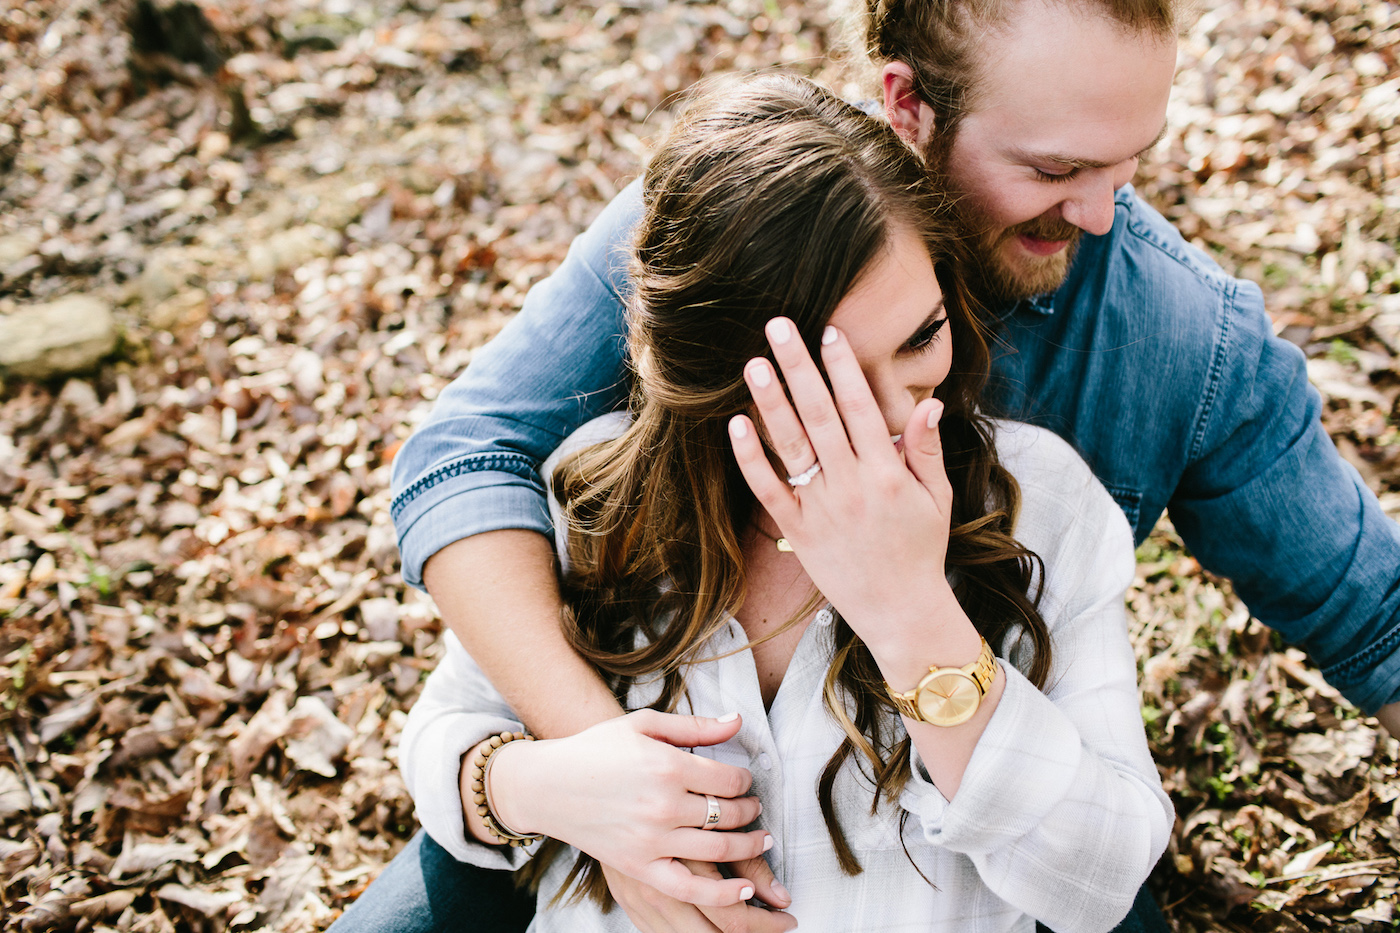 Outdoorsy Adventure Engagement Photos - Moonshine Hill Wedding - High Five for Love Photography -- Wedding Blog - The Overwhelmed Bride